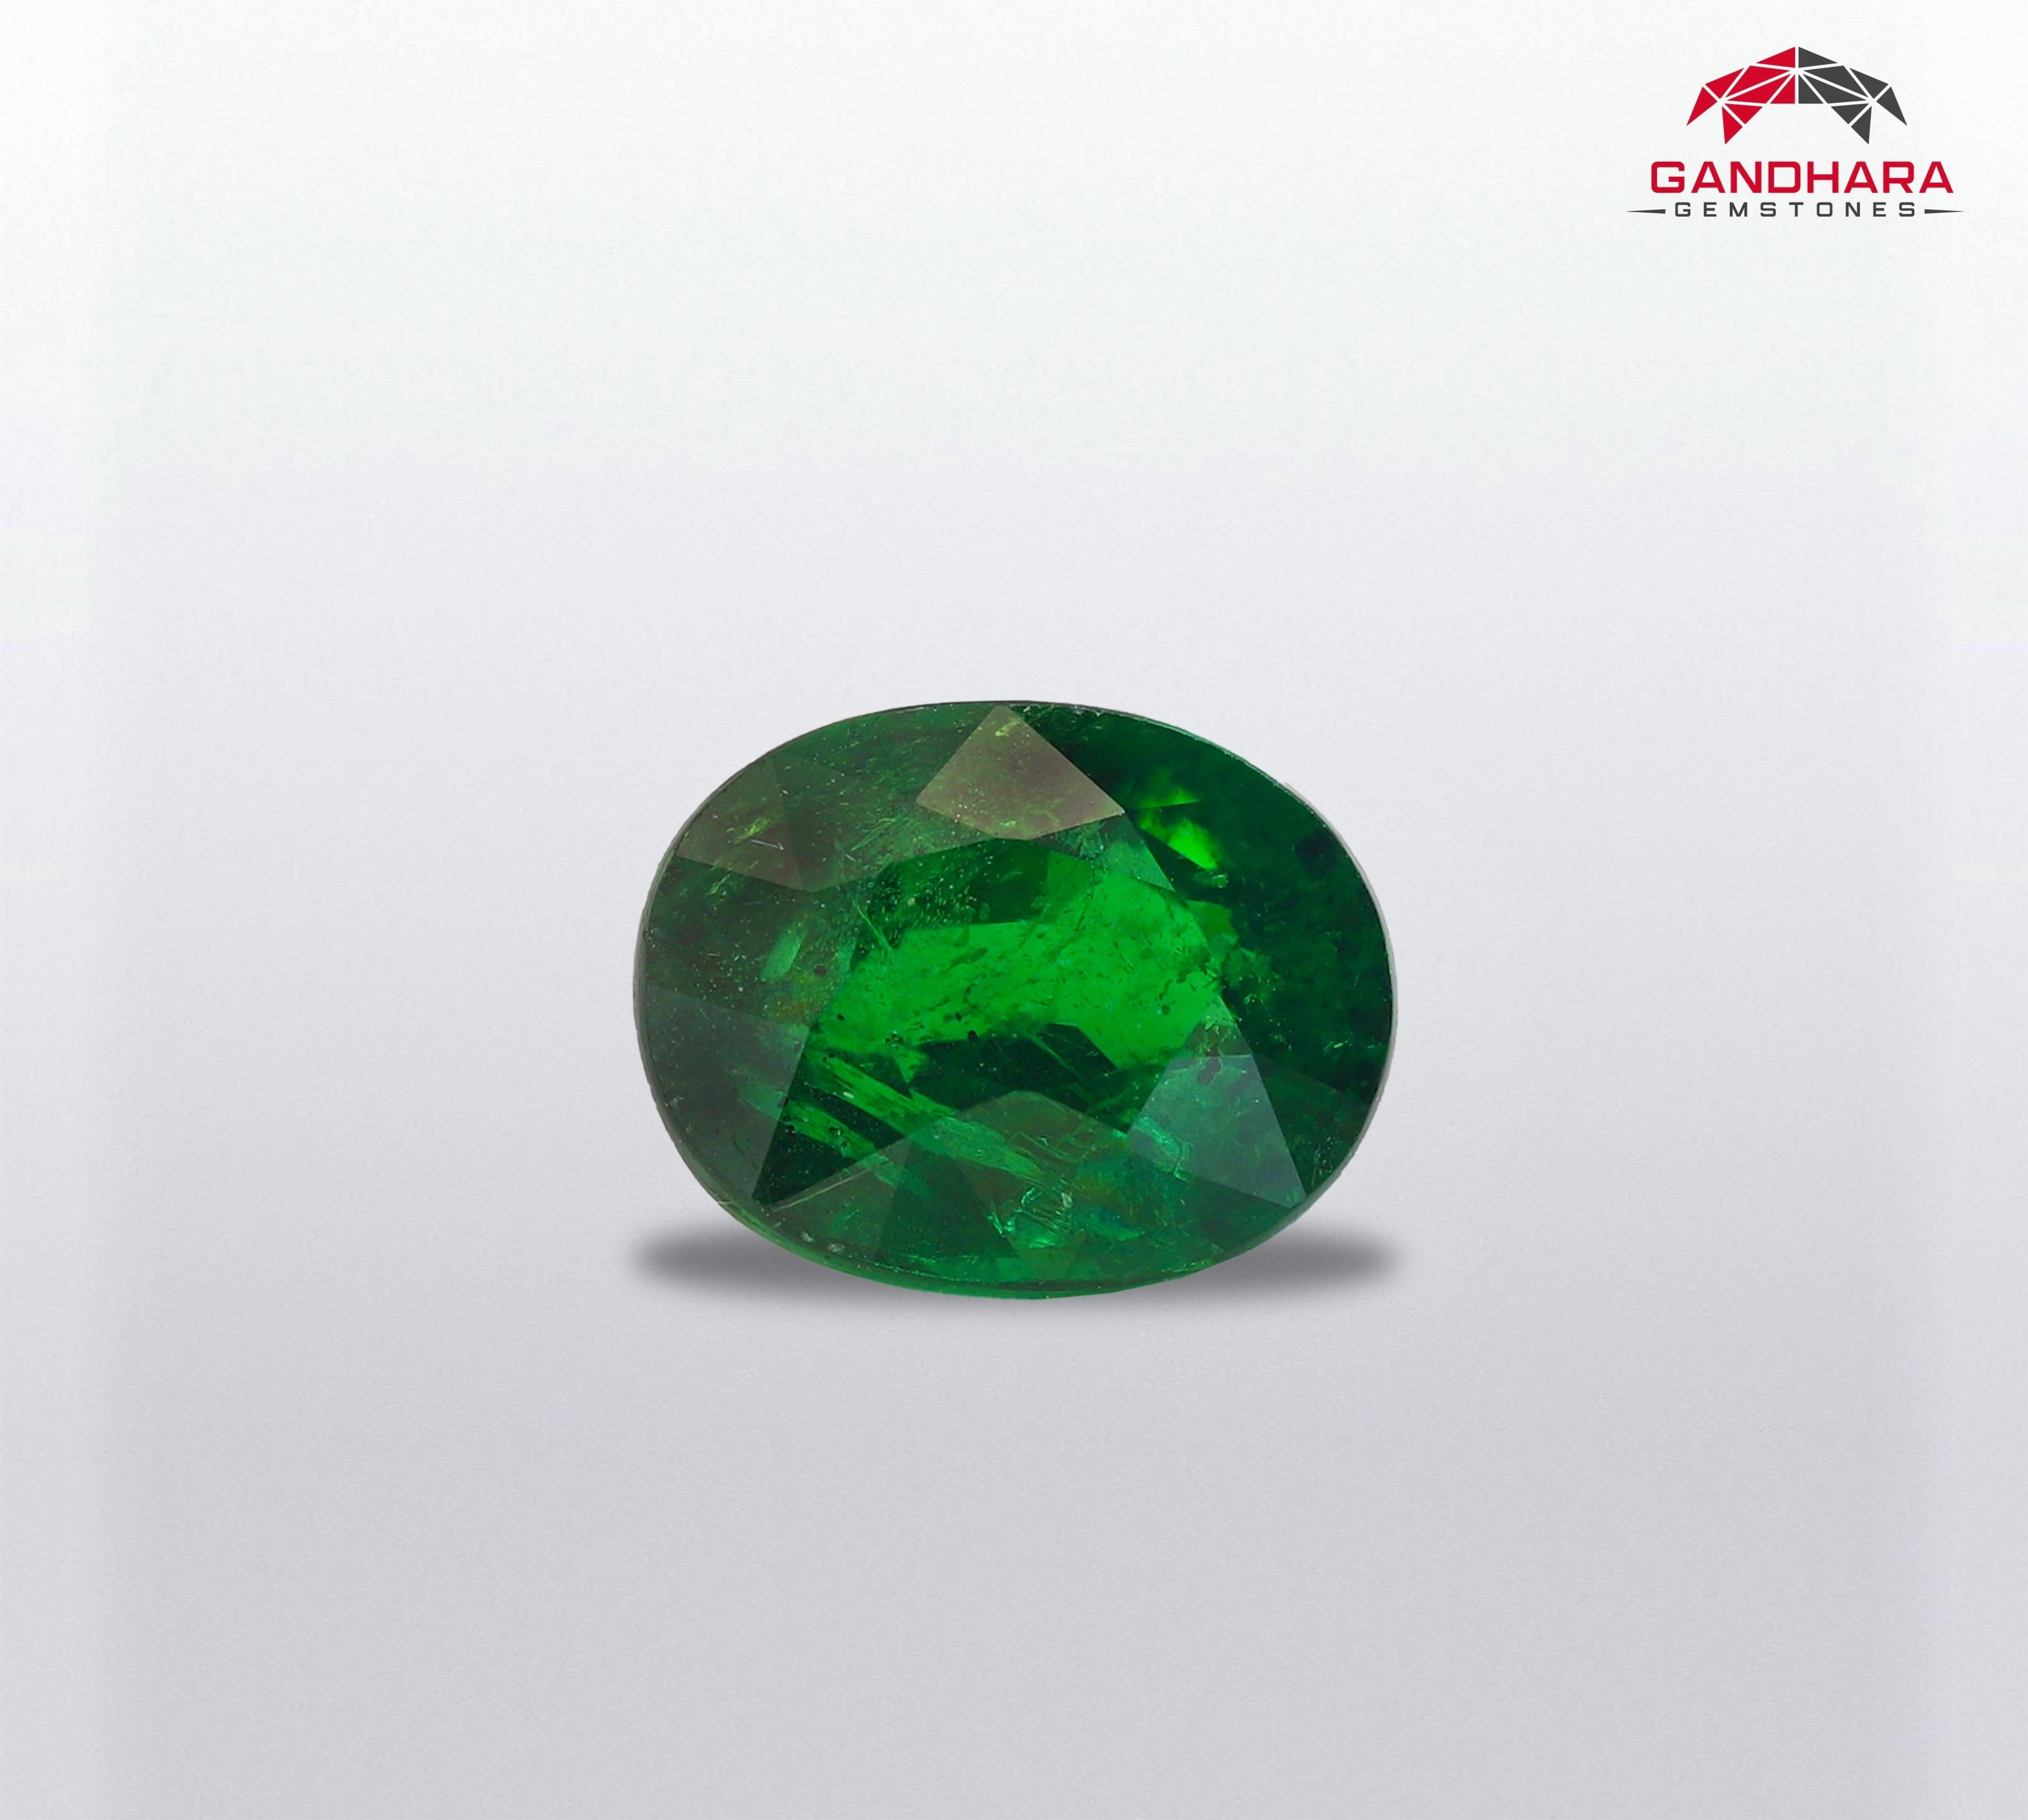 Natural Green Tsavorite Garnet, Available For Sale At Wholesale Price Natural High Quality, 1.62 Carats Certified Garnet Gemstone From Kenya.💚
PRODUCT INFORMATION :
Weight: 1.62 carats 
Dimensions: 7.47 x 5.81 x 4.40 mm
Treatment: none 
Origin: